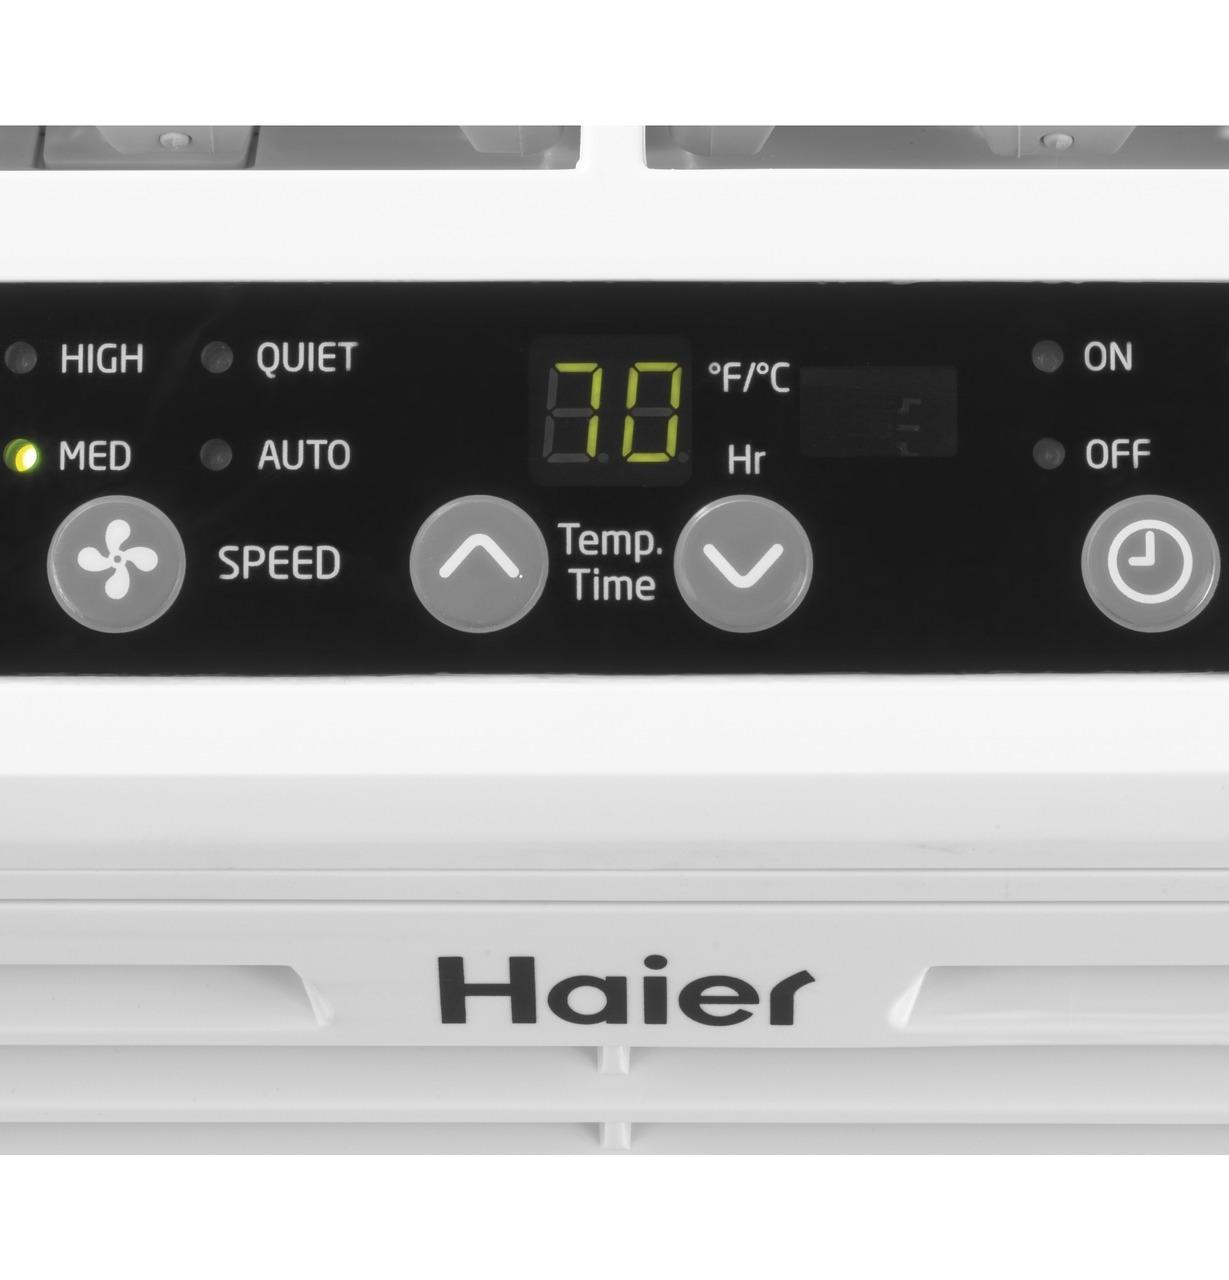 Haier ENERGY STAR® 6,200 BTU Ultra Quiet Window Air Conditioner for Small Rooms up to 250 sq. ft.